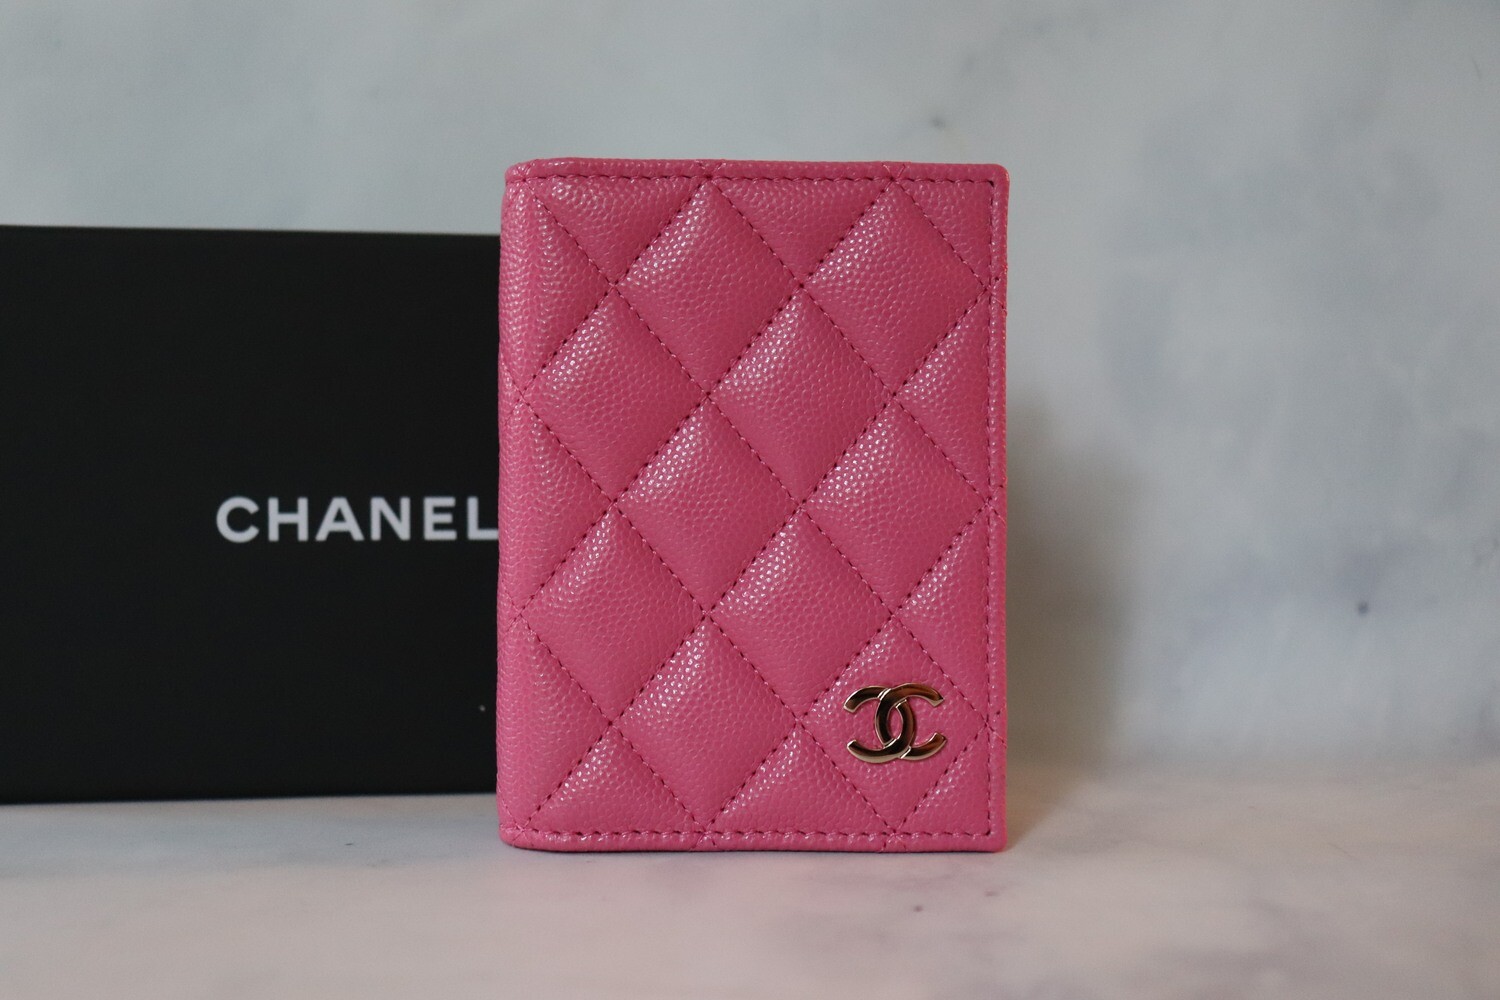 Chanel SLG Bifold Card Case, 20S Pink with Light Gold Hardware, Like New in  Box - Julia Rose Boston